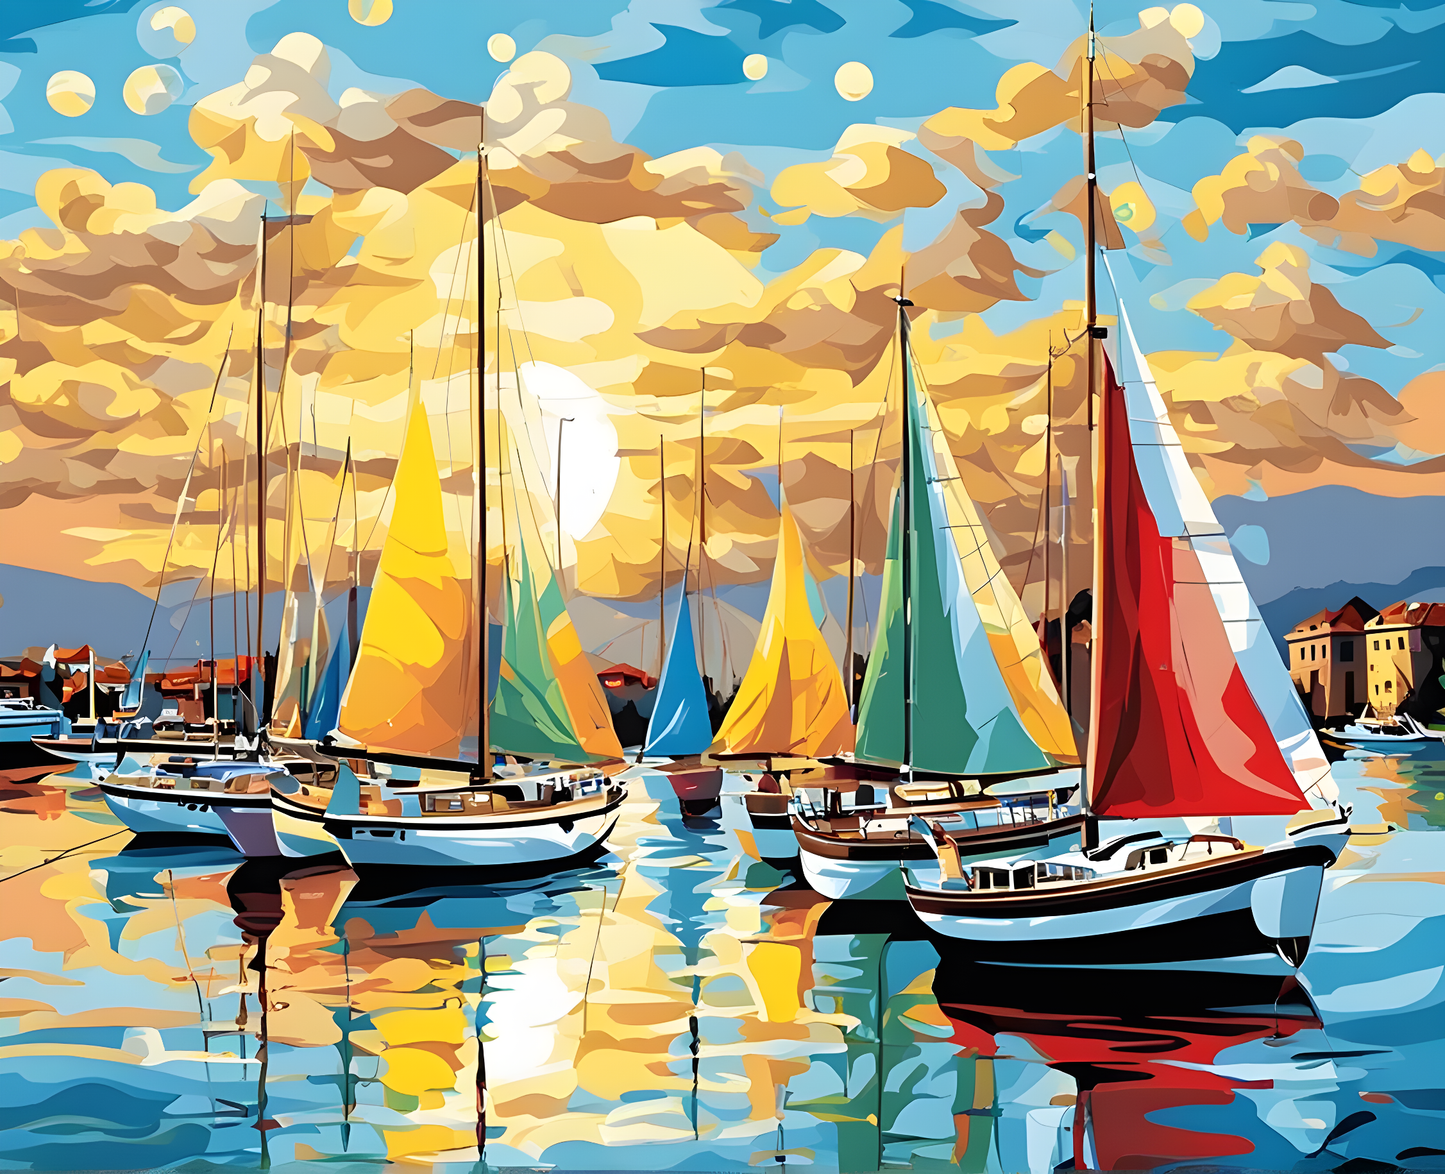 Sailboats on a sunny day (1) - Van-Go Paint-By-Number Kit